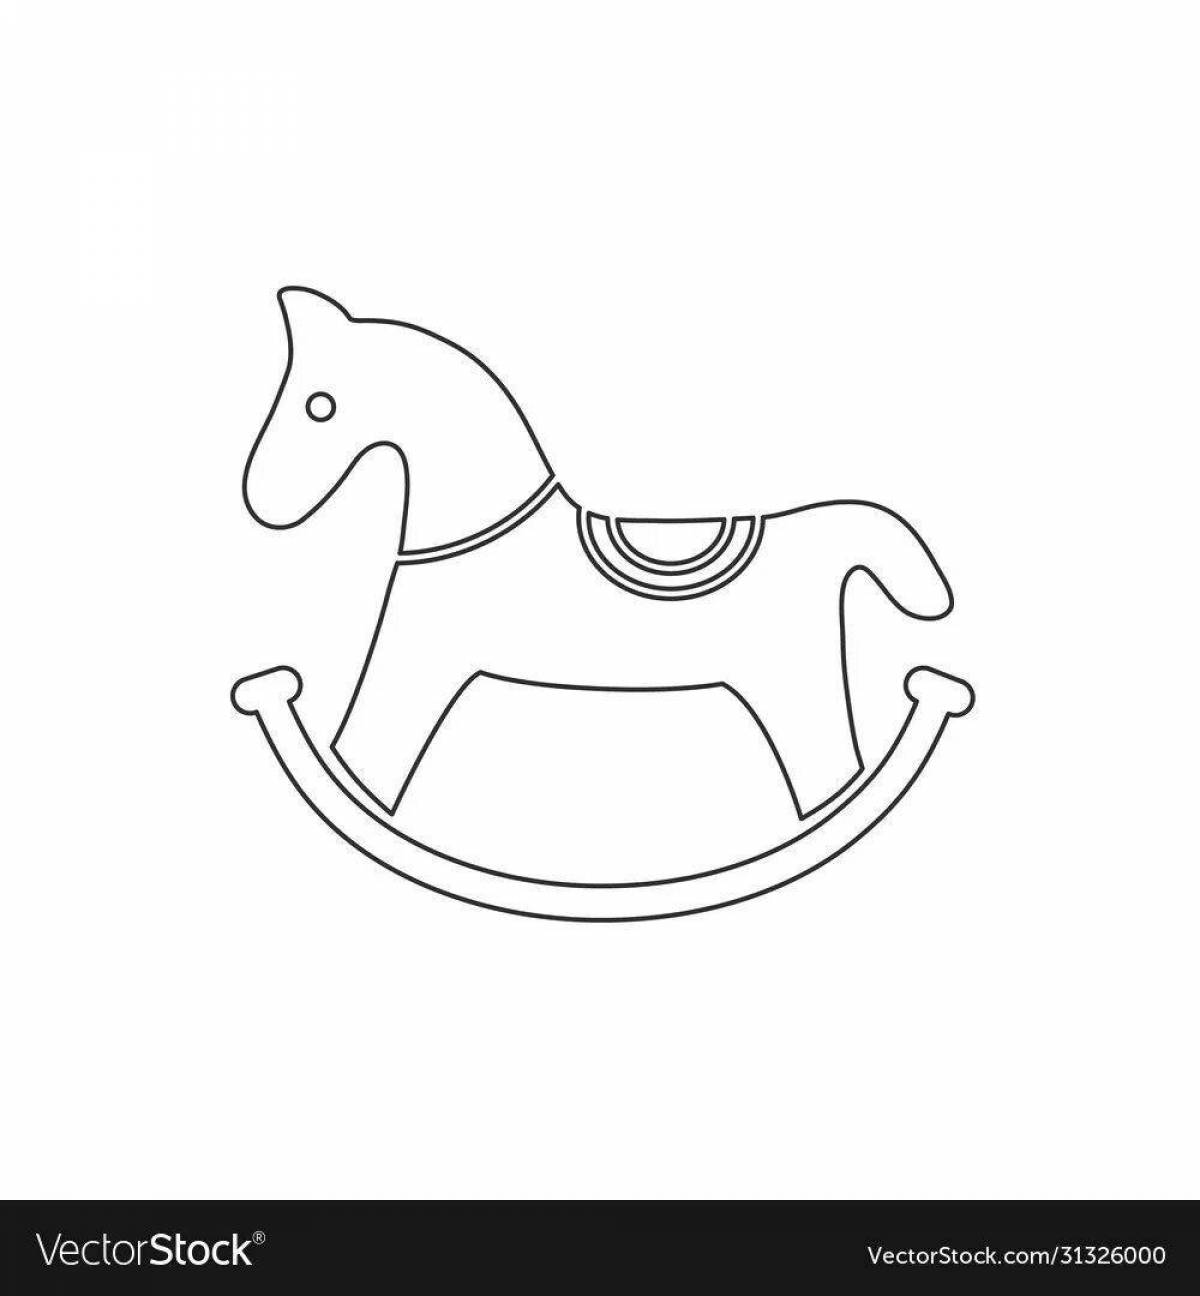 Coloring book gorgeous rocking horse